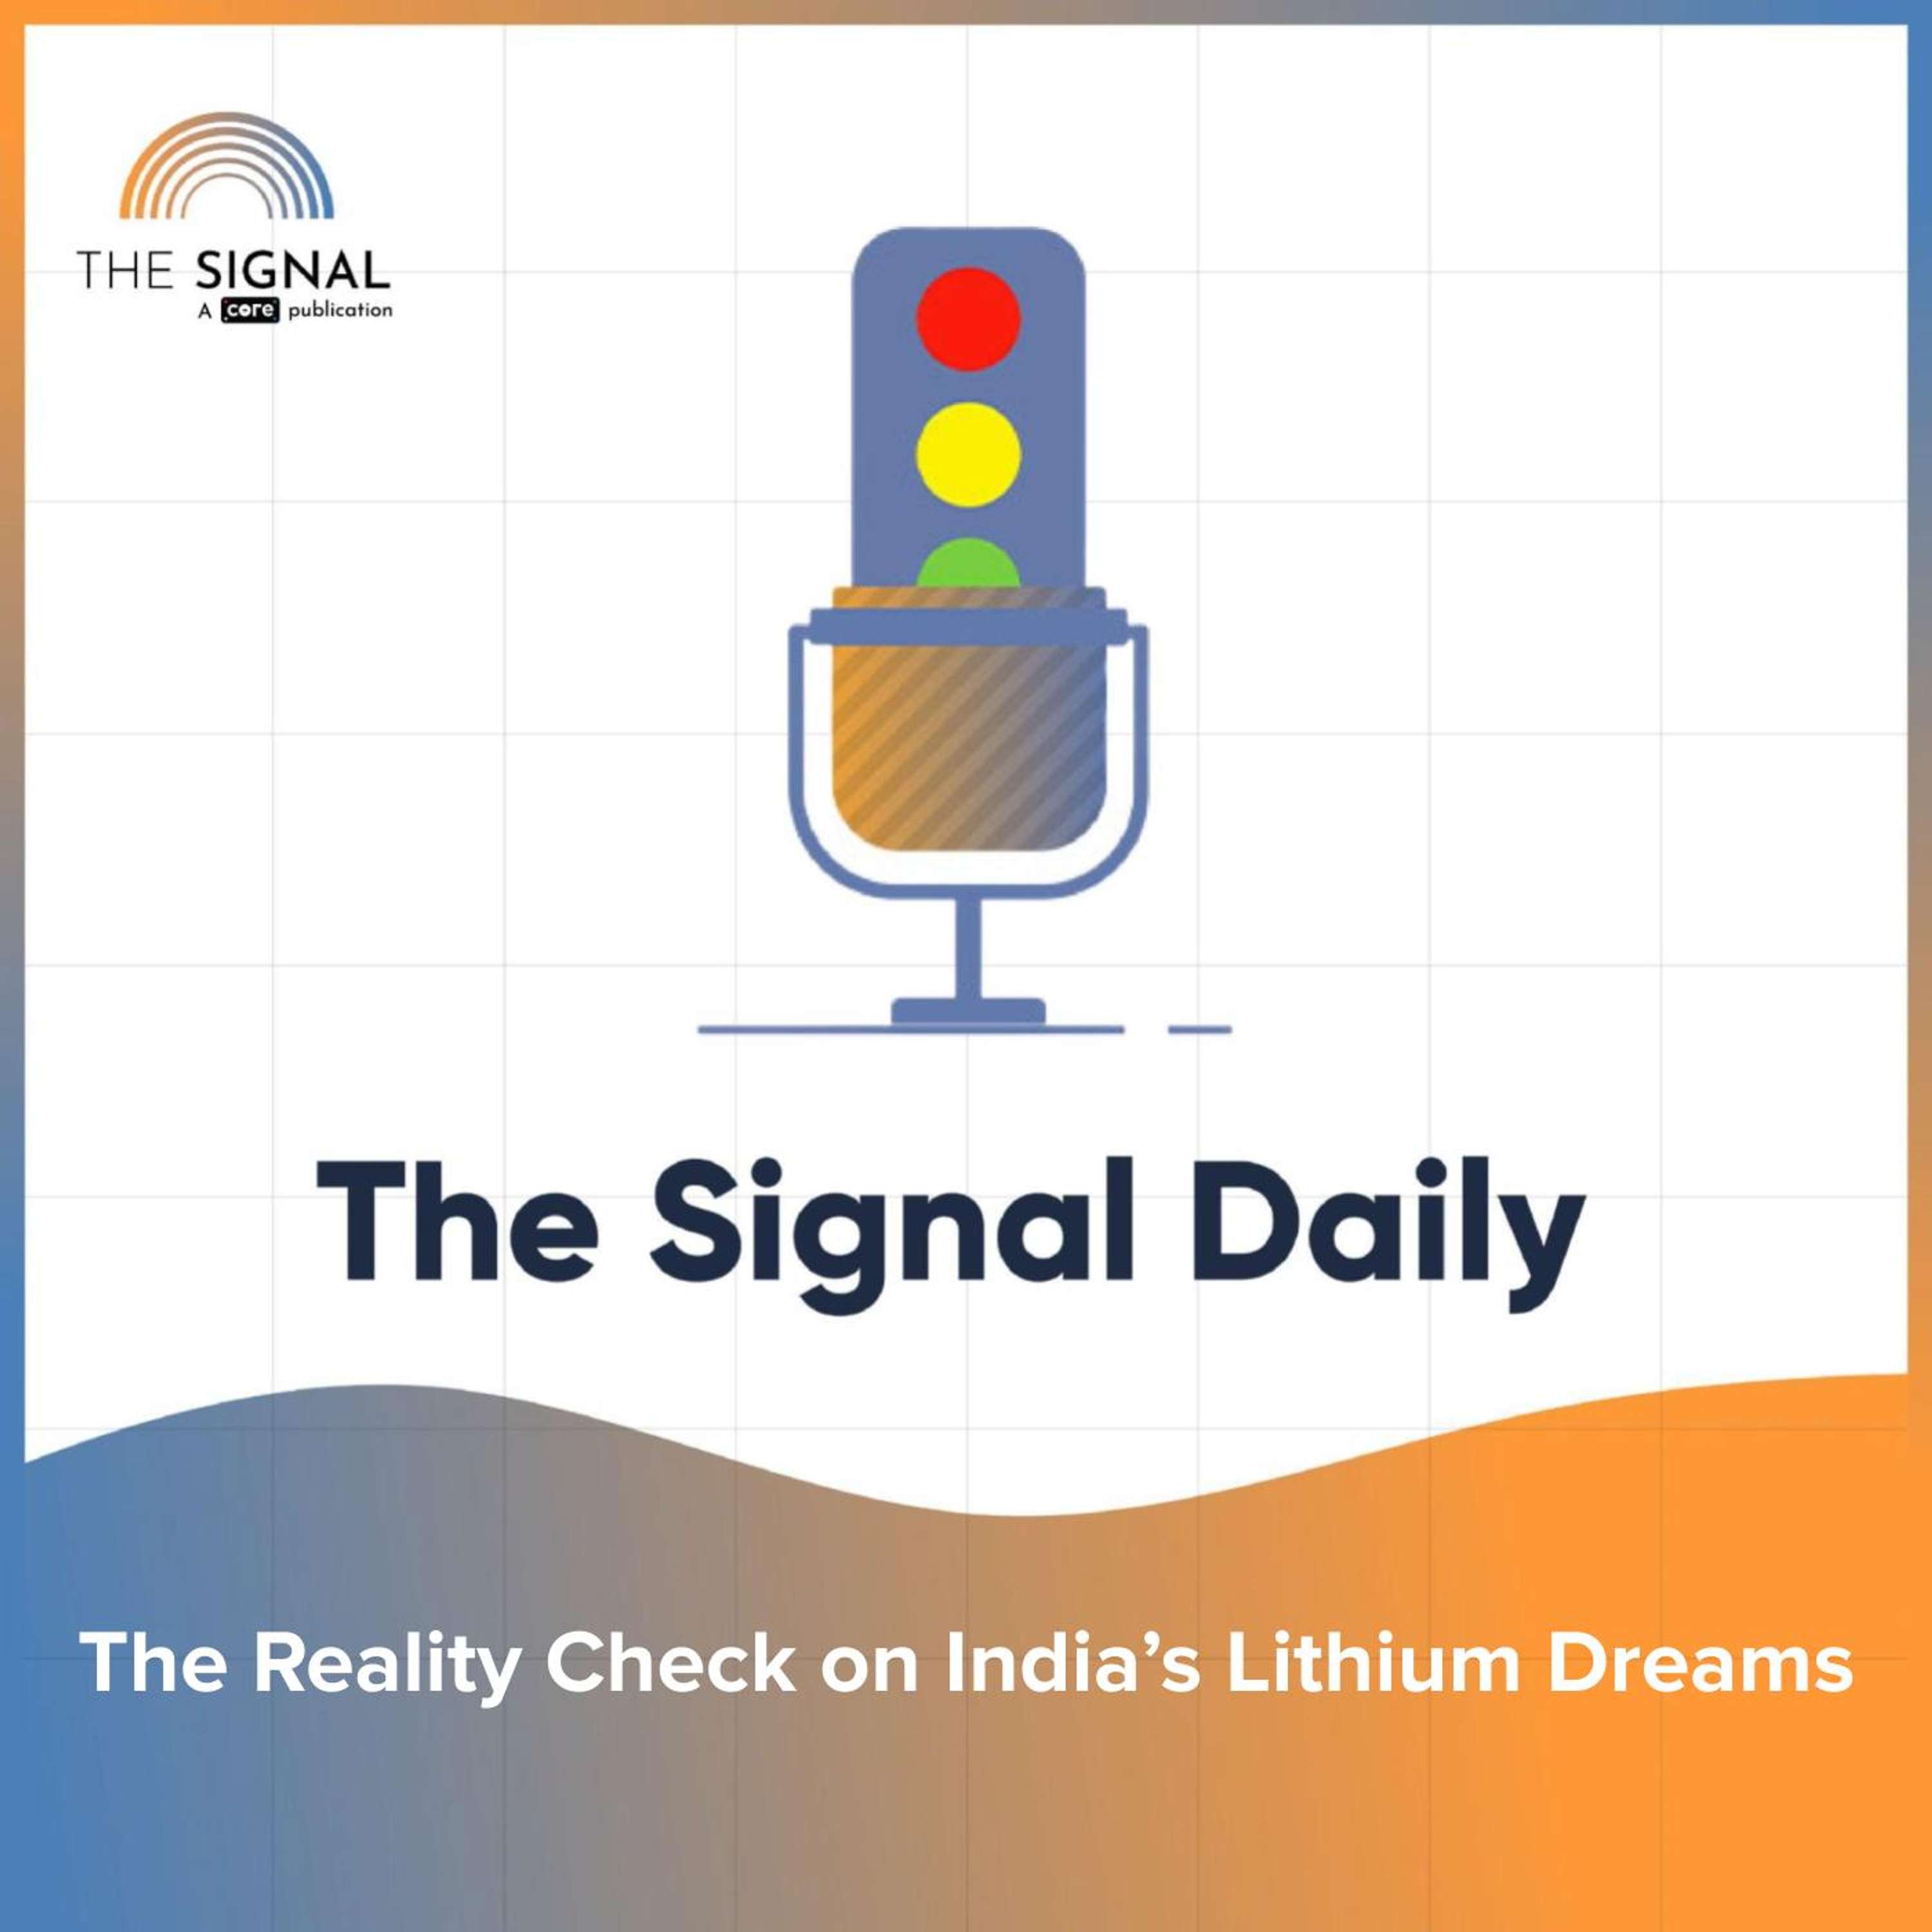 The Reality Check on India's Lithium Dreams